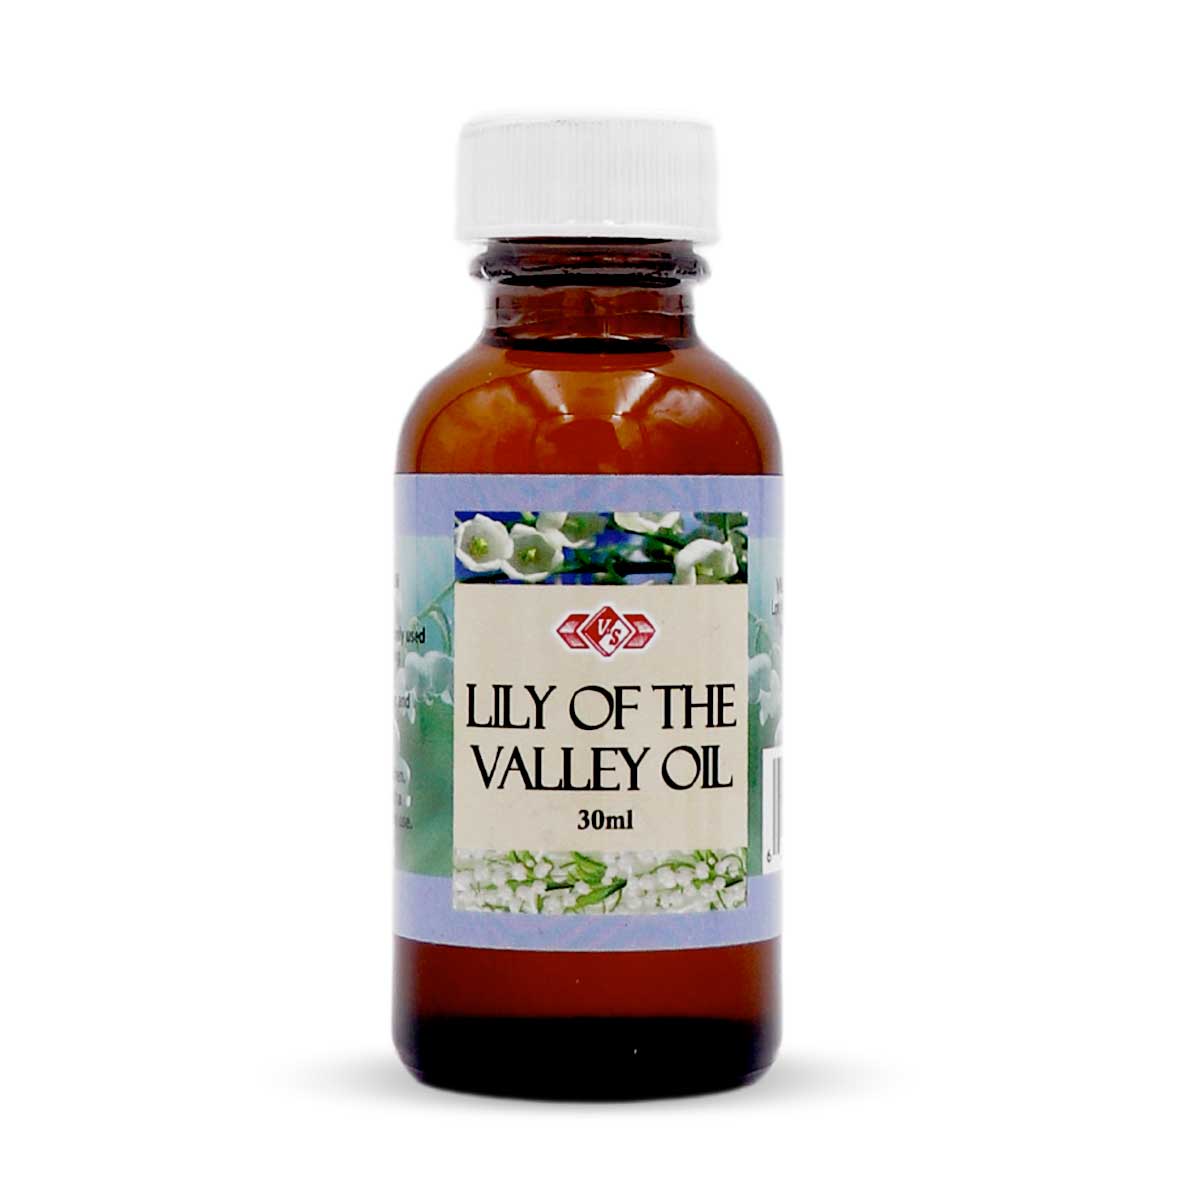 V&S Lily of The Valley Oil, 30ml